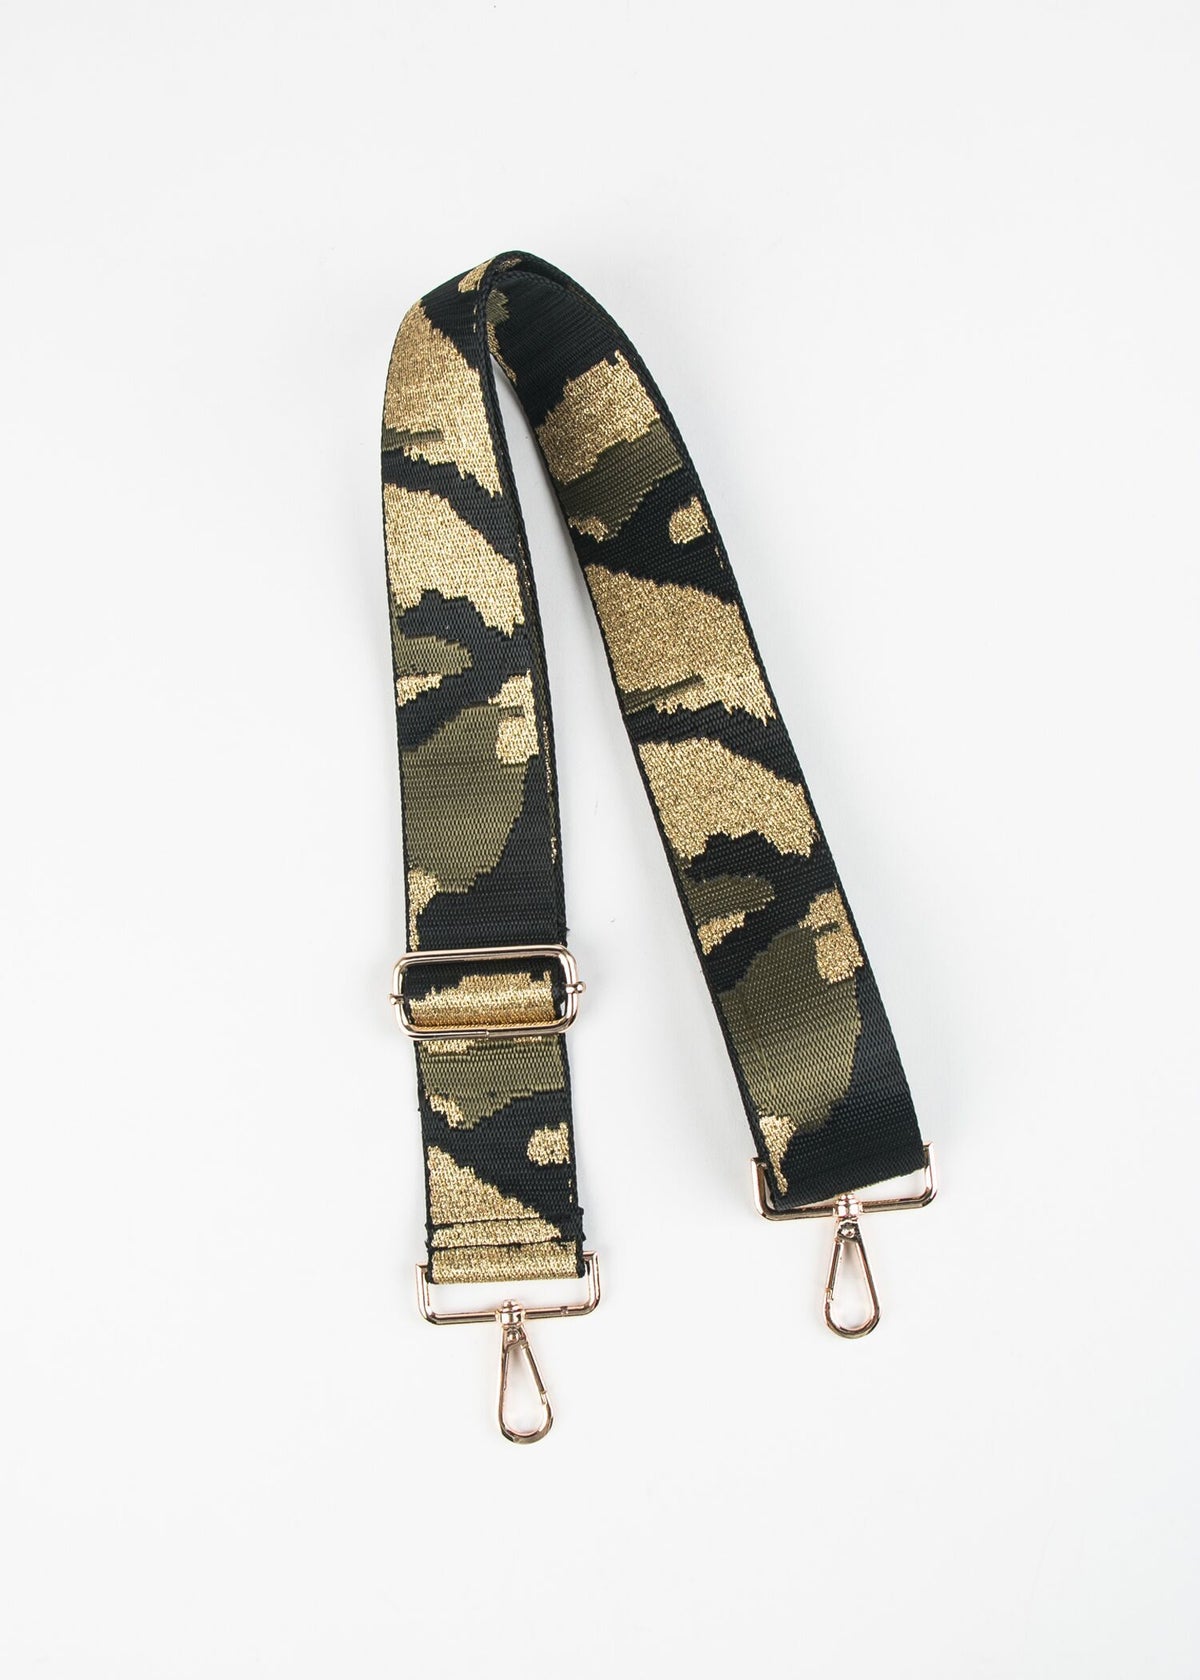 Ahdorned Black/Army/Gold Camo Adjustable Strap at the Lowest Online ...